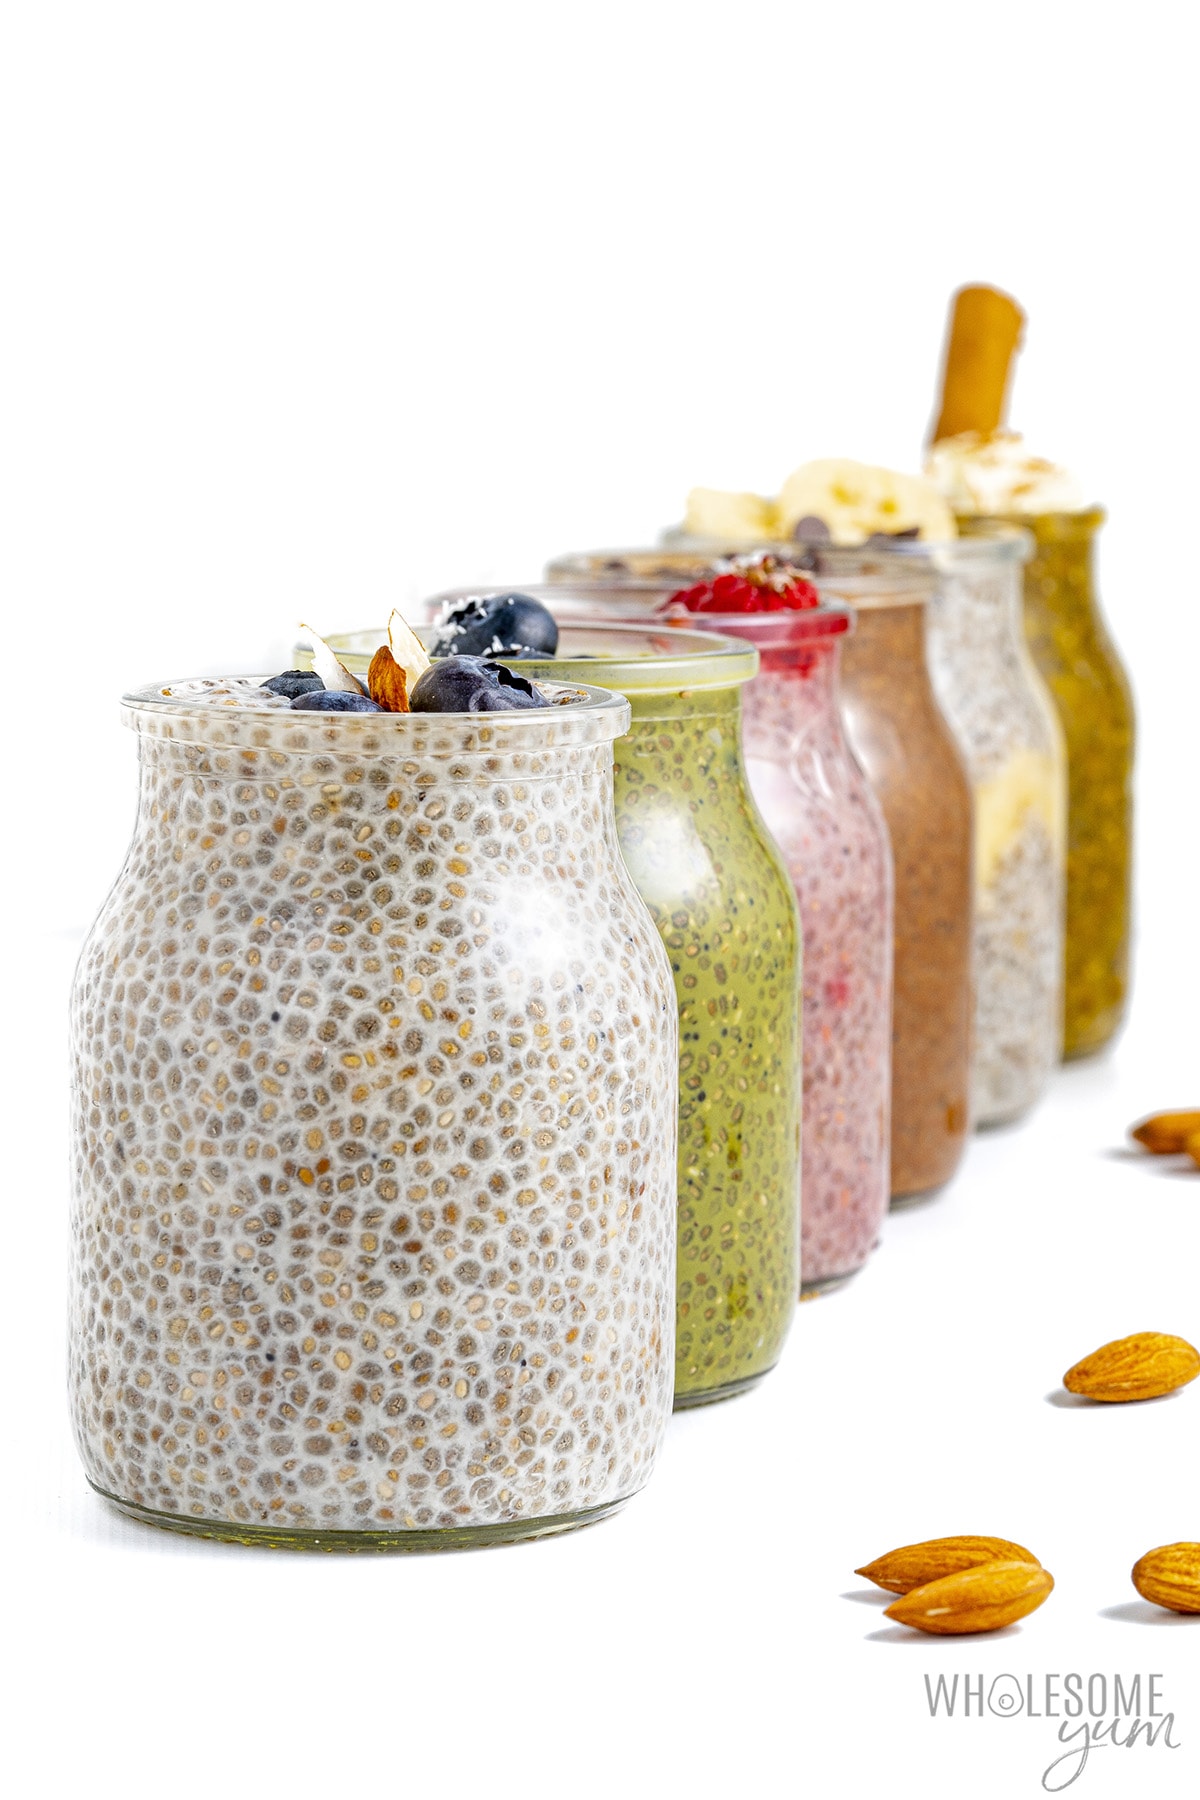 Low-Carb / Keto, Paleo, Whole30 Chia Seed Pudding - Instant PotLuck